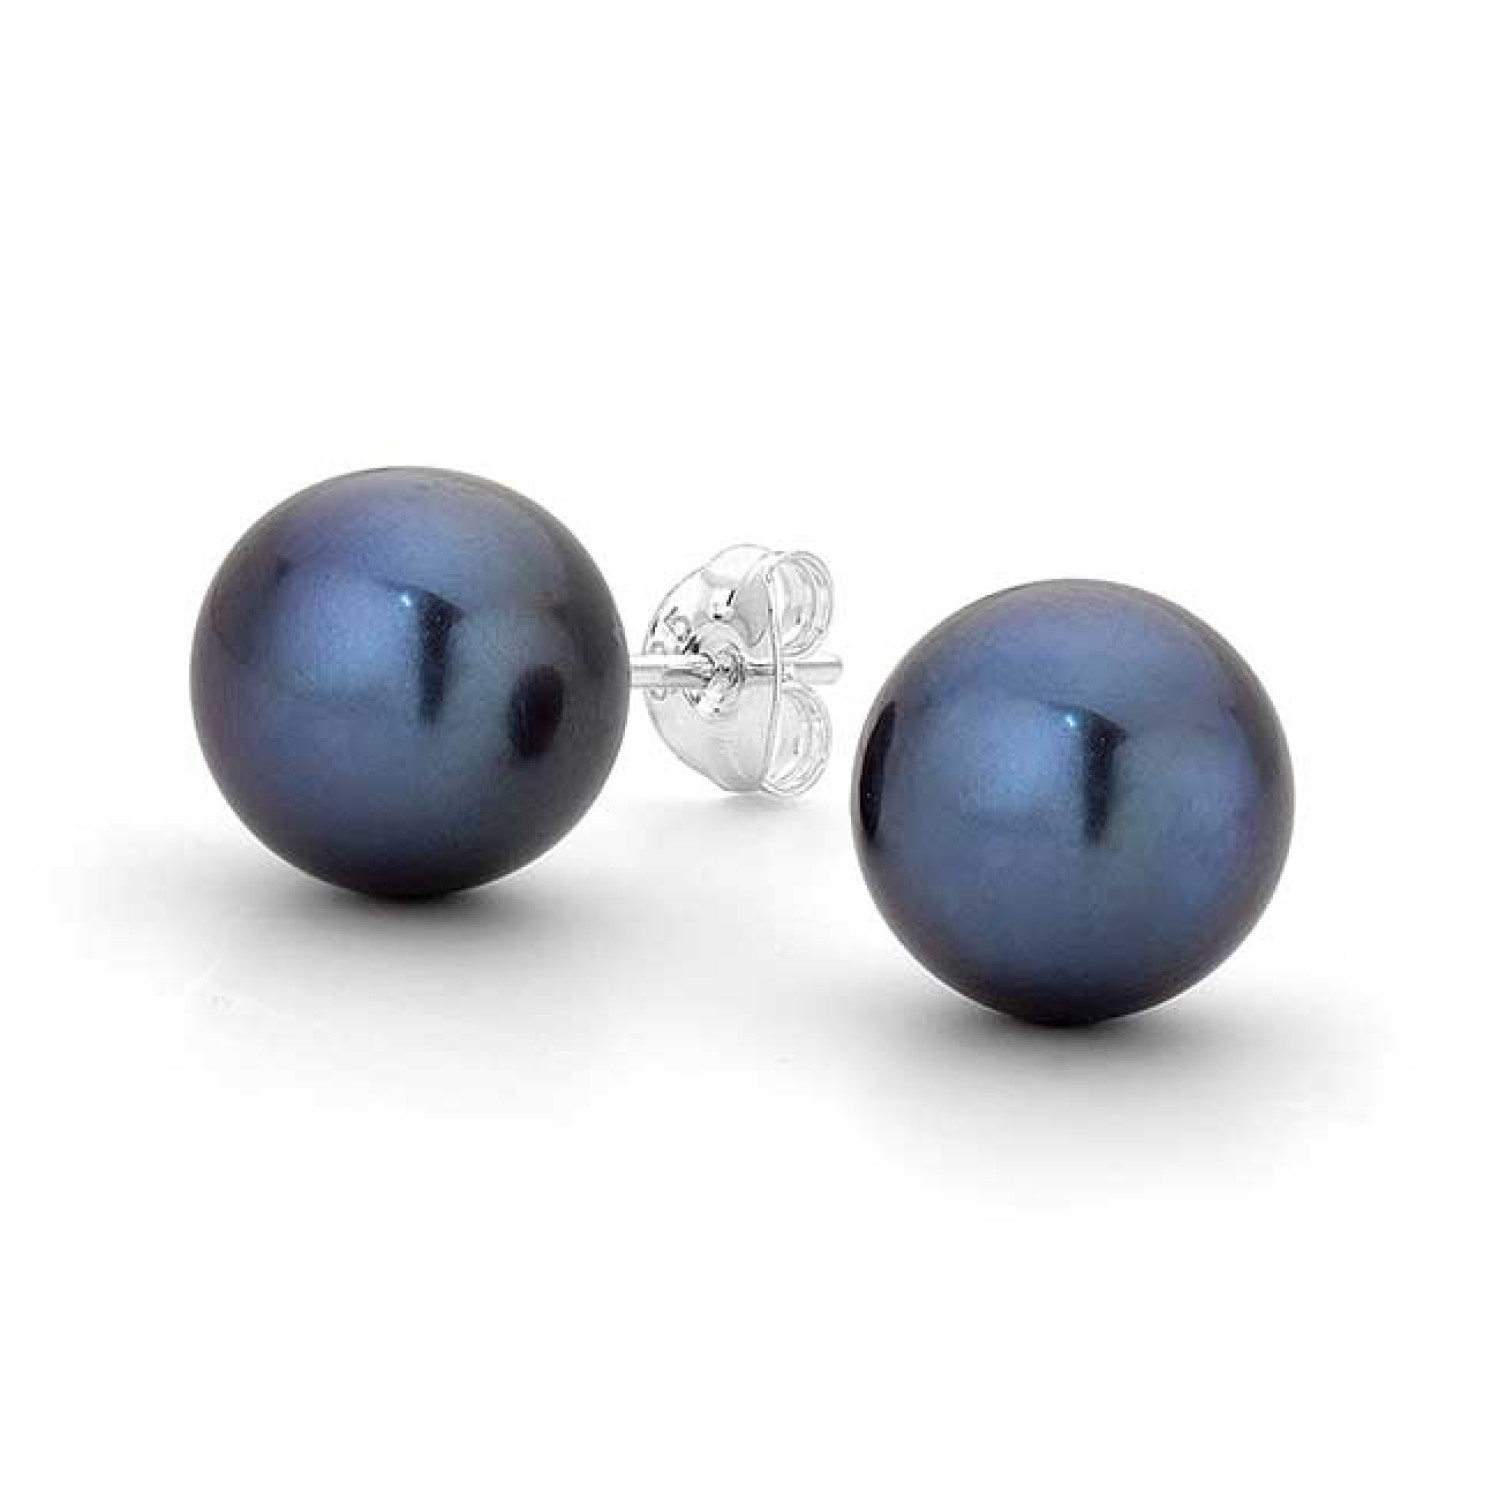 Freshwater Black Pearl Earrings in Silver. Sterling Silver Pearl earrings featuring a 9mm freshwater black dyed pearl 3 Months No Payments and Interest for Q Card holders 925 Sterling Silver Earrings with stud fitting 9mm freshwater button pearl Christies